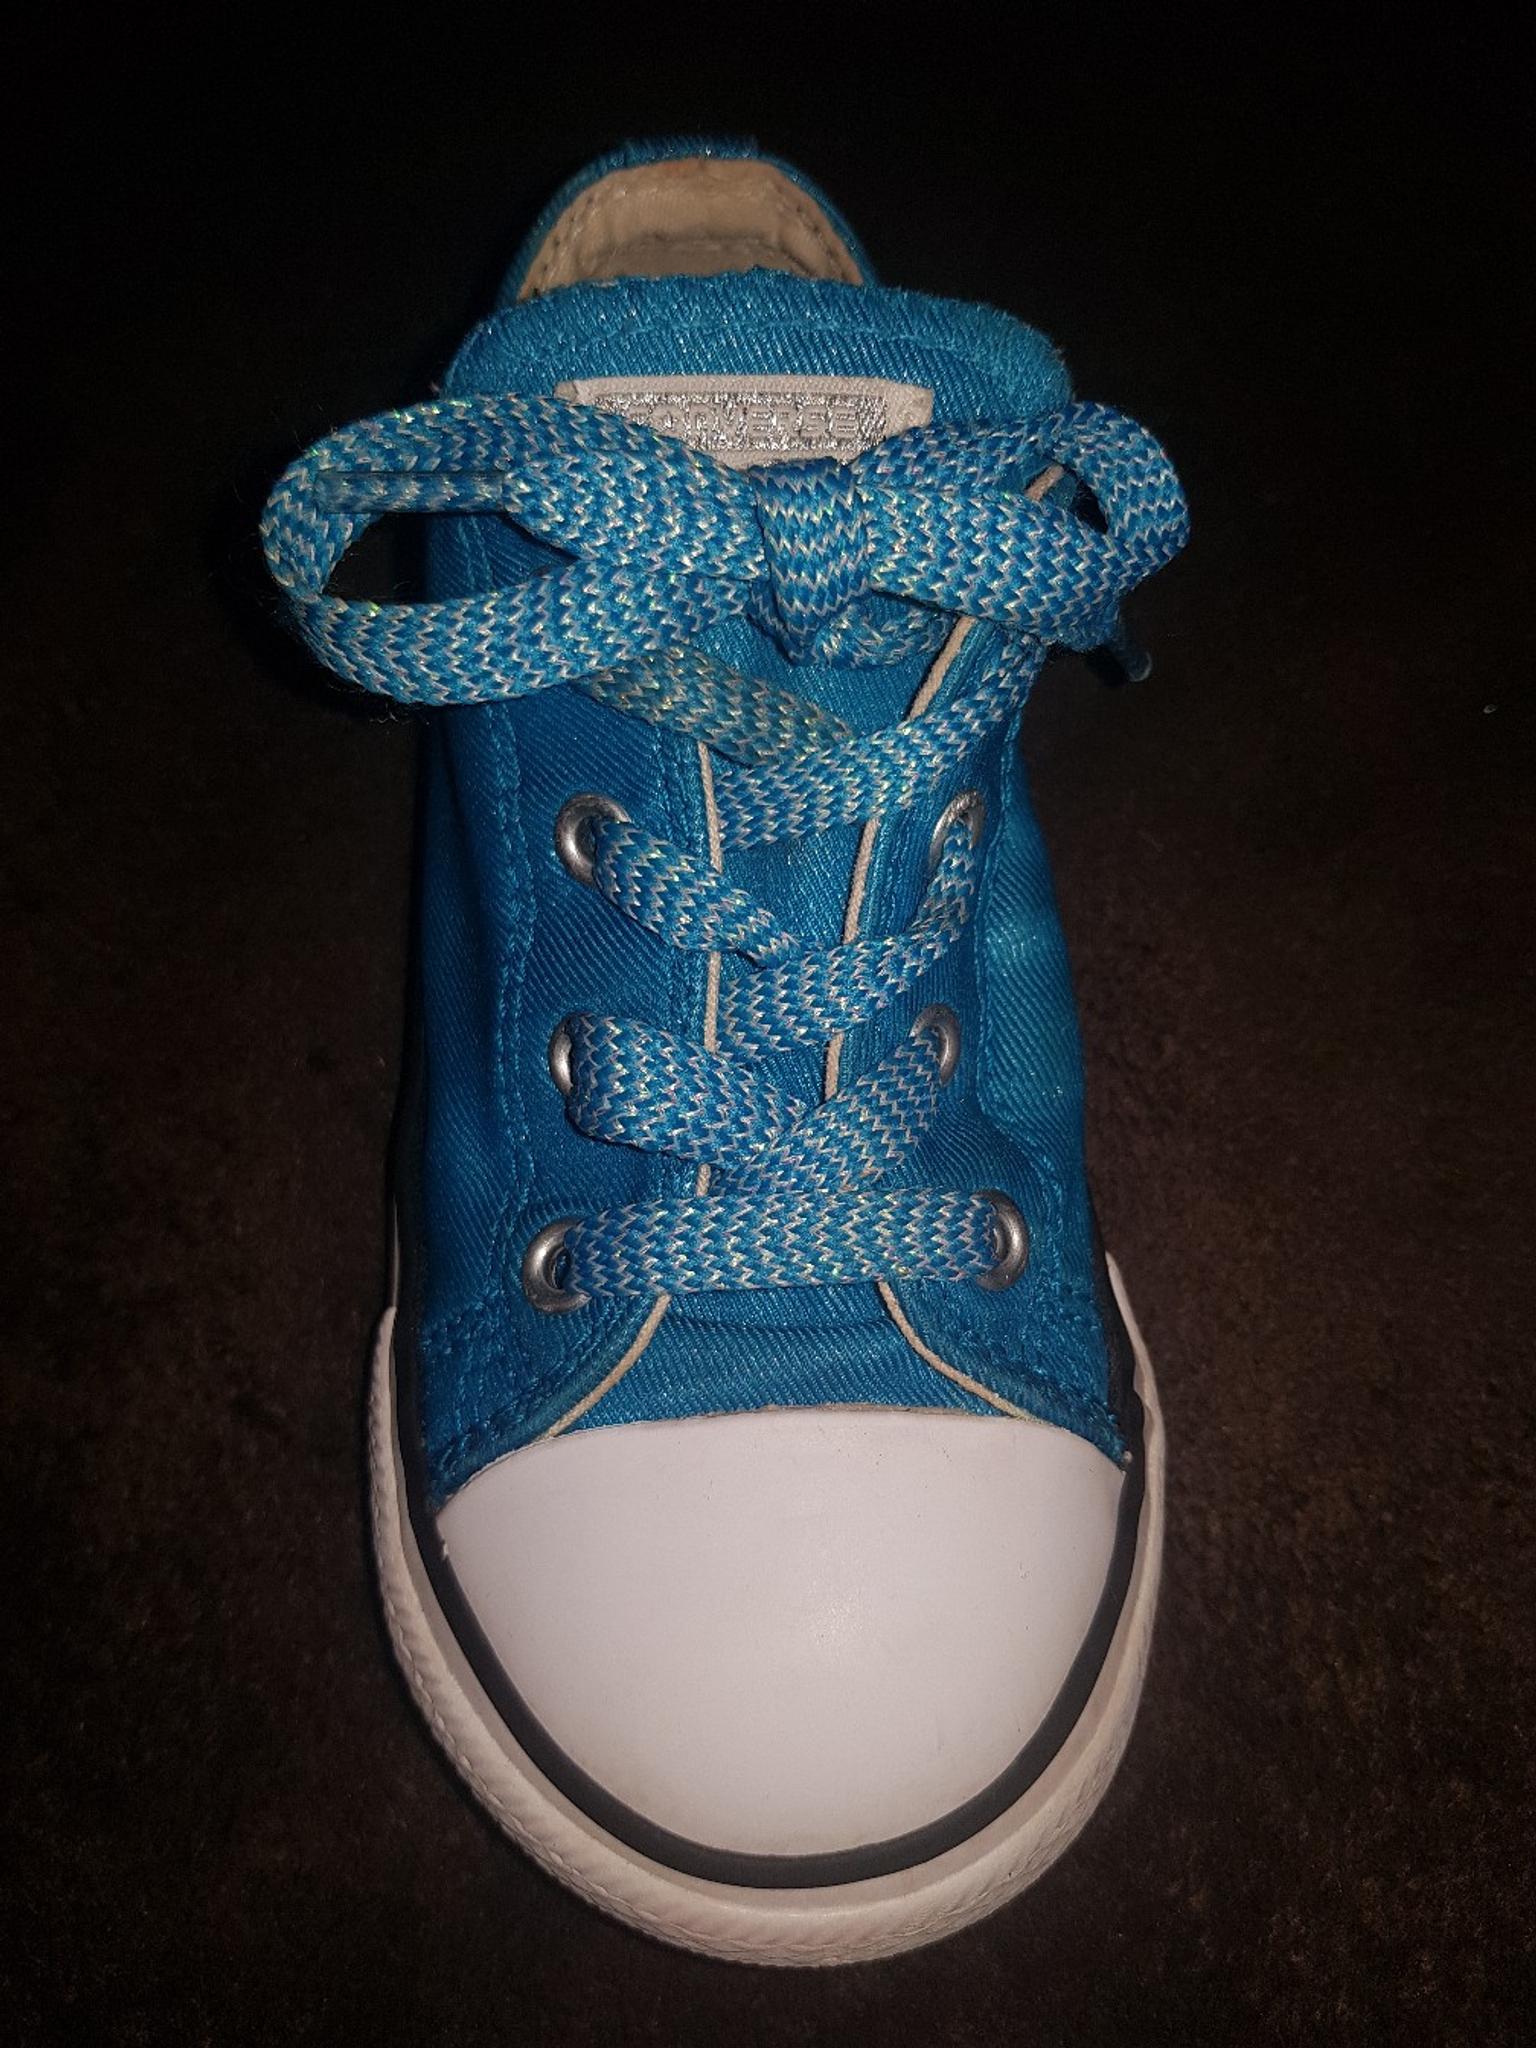 Converse Gr. 25/26 (9) in 6714 Gemeinde Nüziders for €18.00 for sale |  Shpock